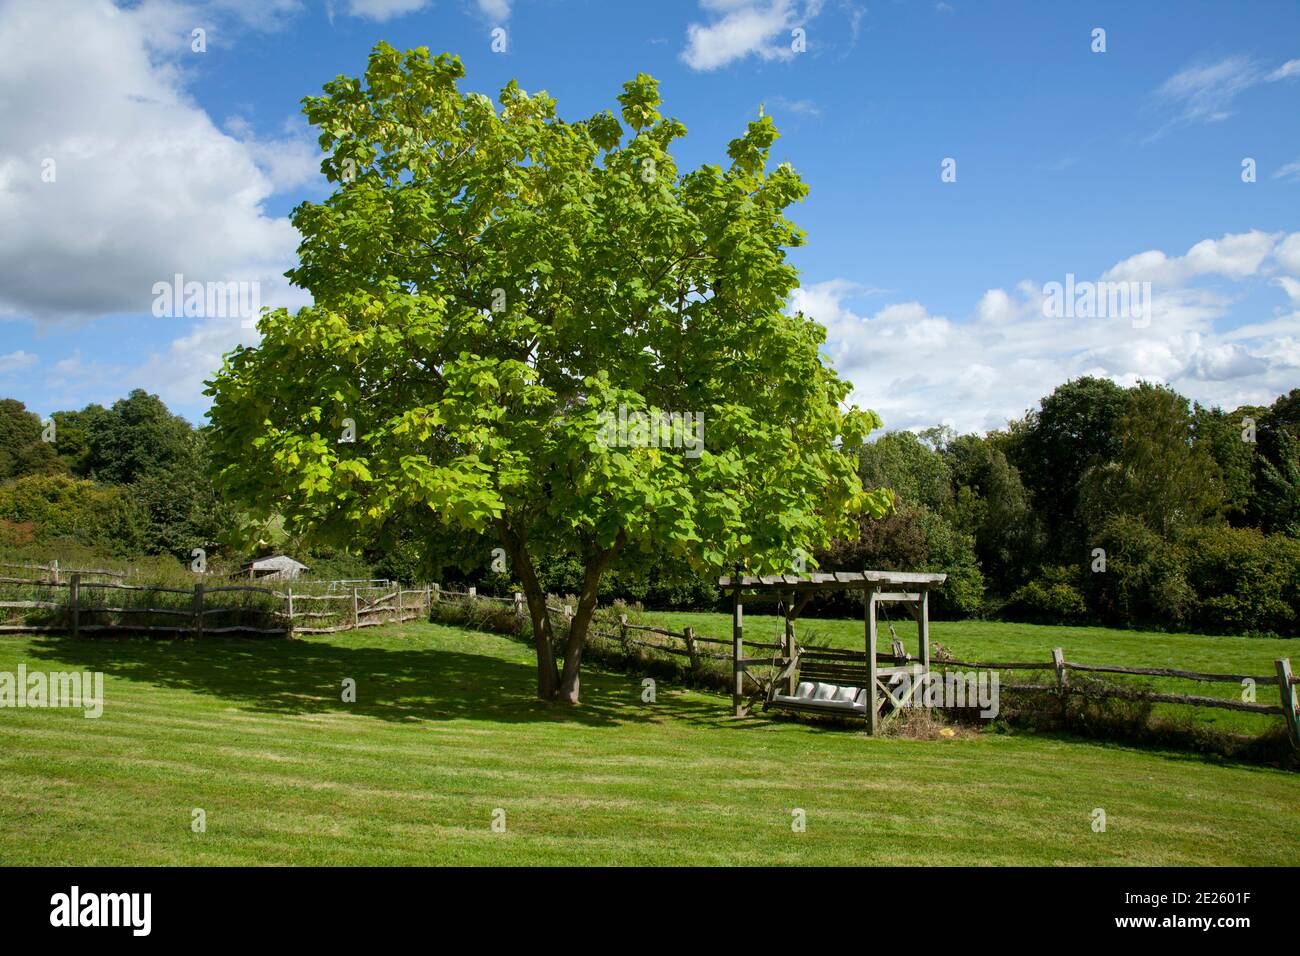 Garden with tree and wooden garden swing seat bench on edge of field Stock Photo